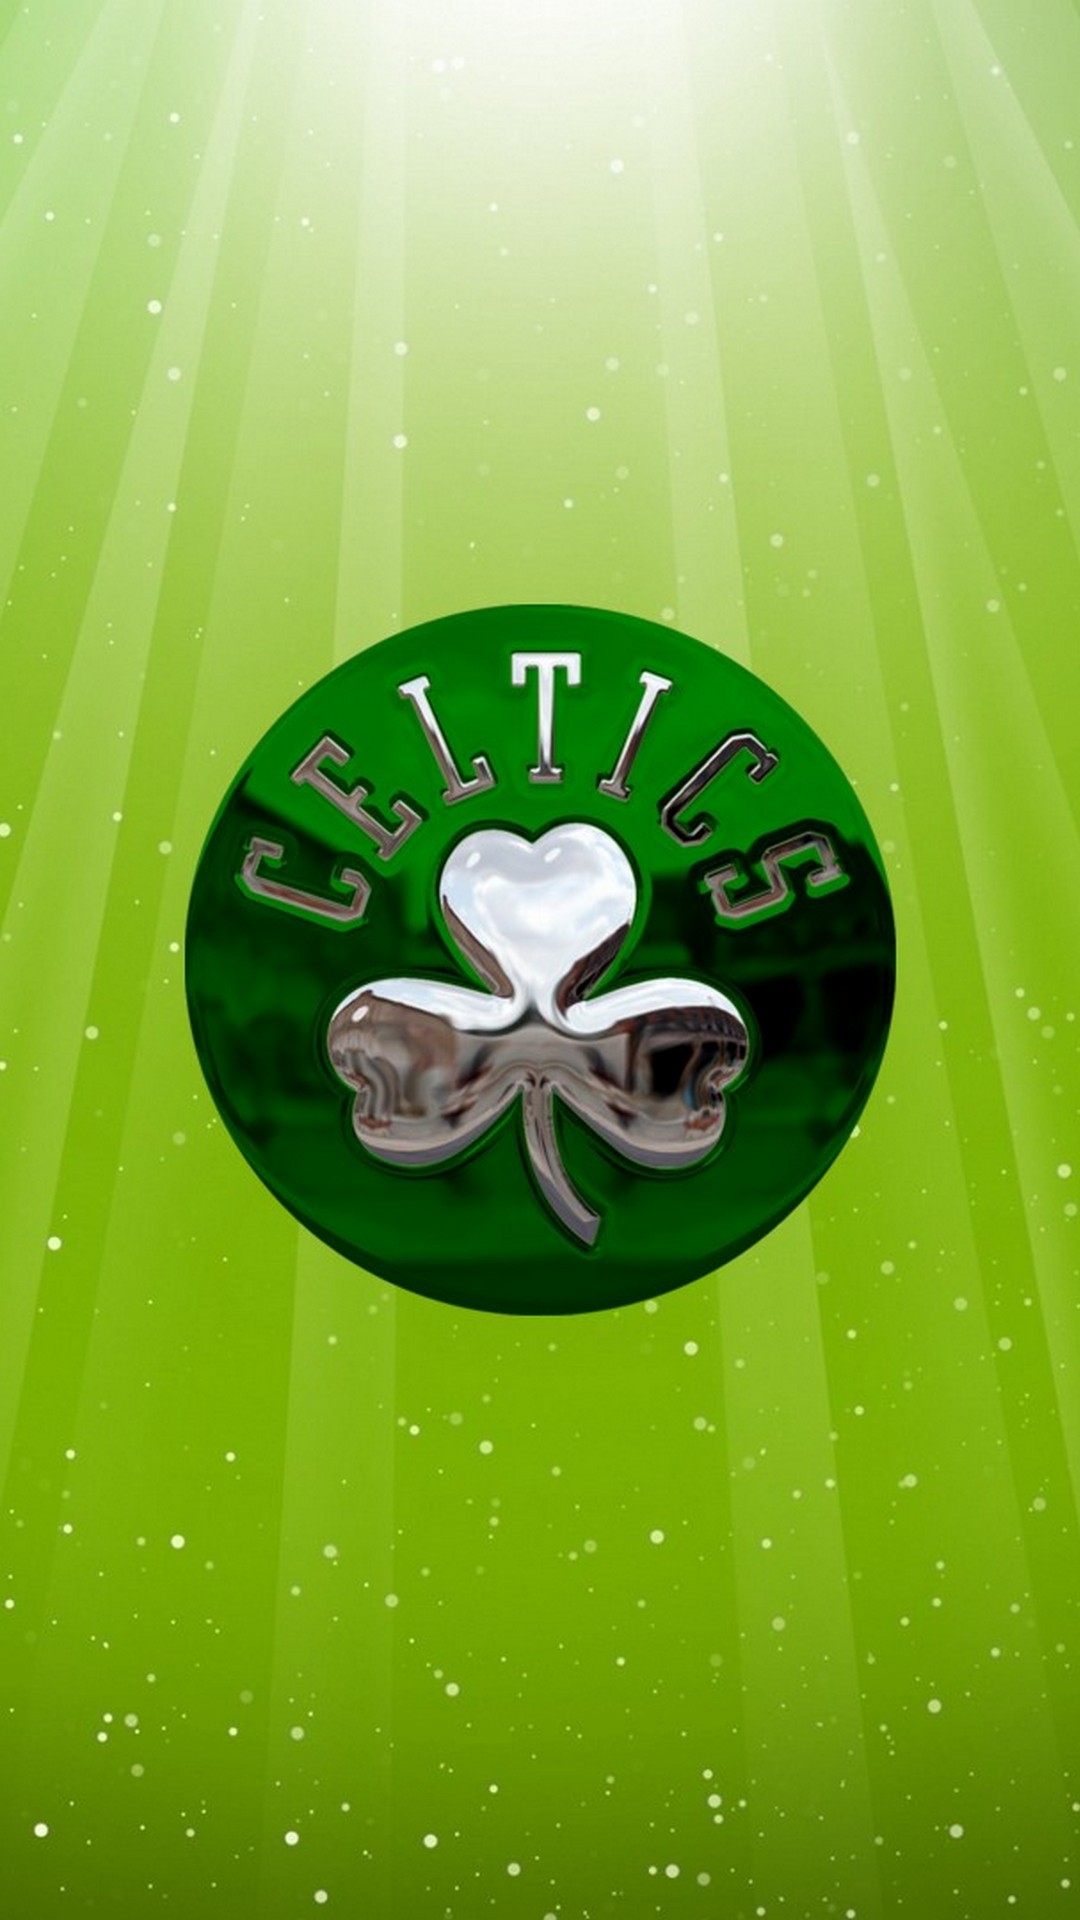 Boston Celtics Backgrounds For Android with resolution 1080X1920 pixel. You can make this wallpaper for your Android backgrounds, Tablet, Smartphones Screensavers and Mobile Phone Lock Screen